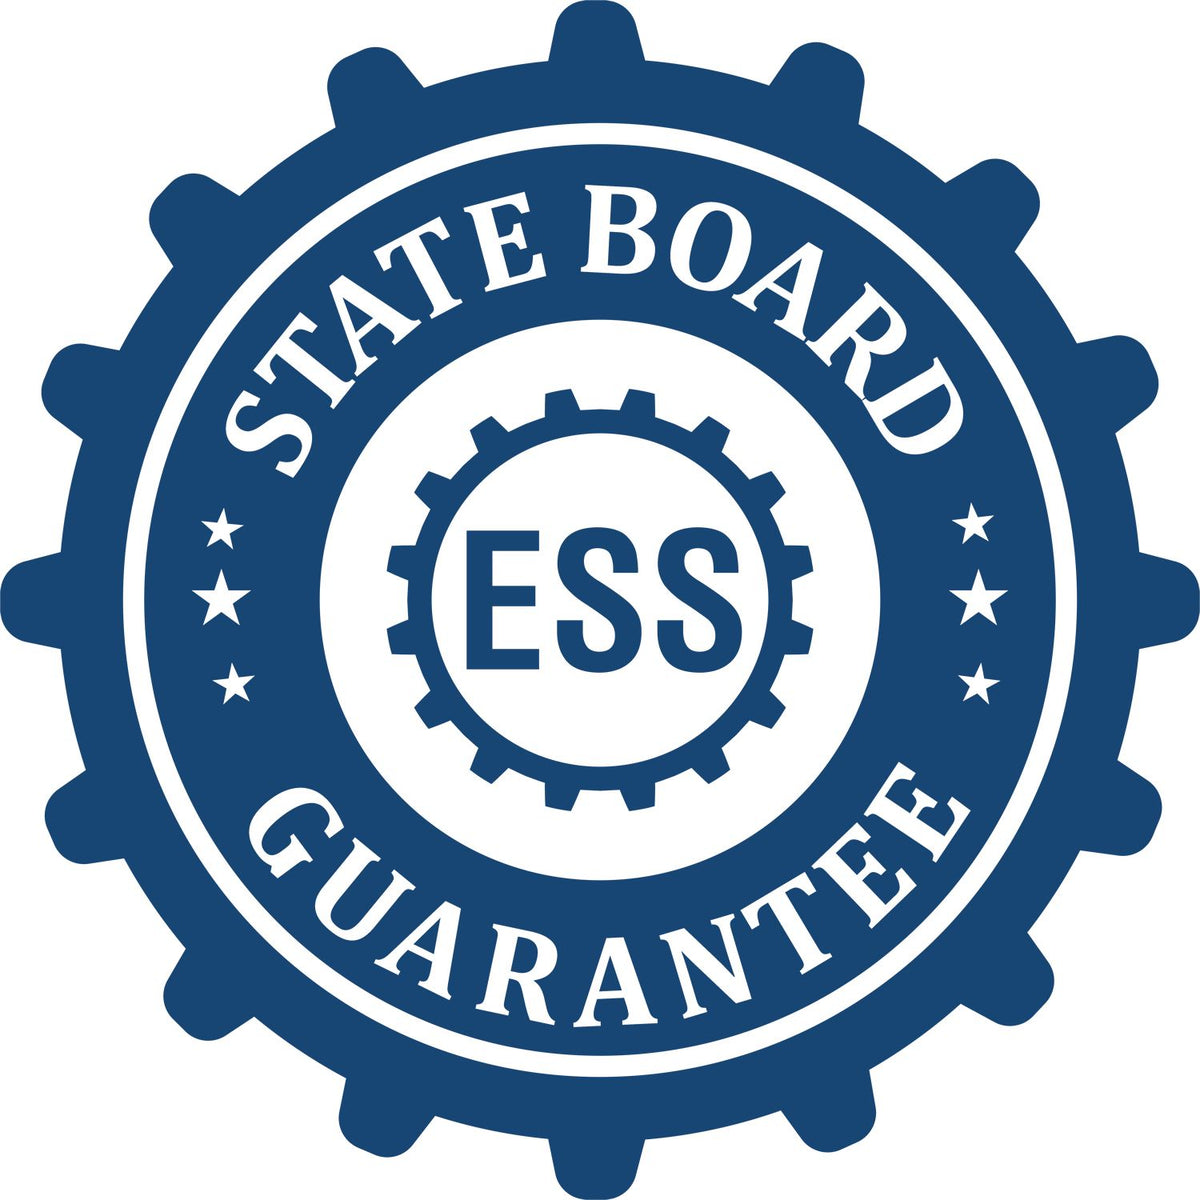 An emblem in a gear shape illustrating a state board guarantee for the Hybrid New York Architect Seal